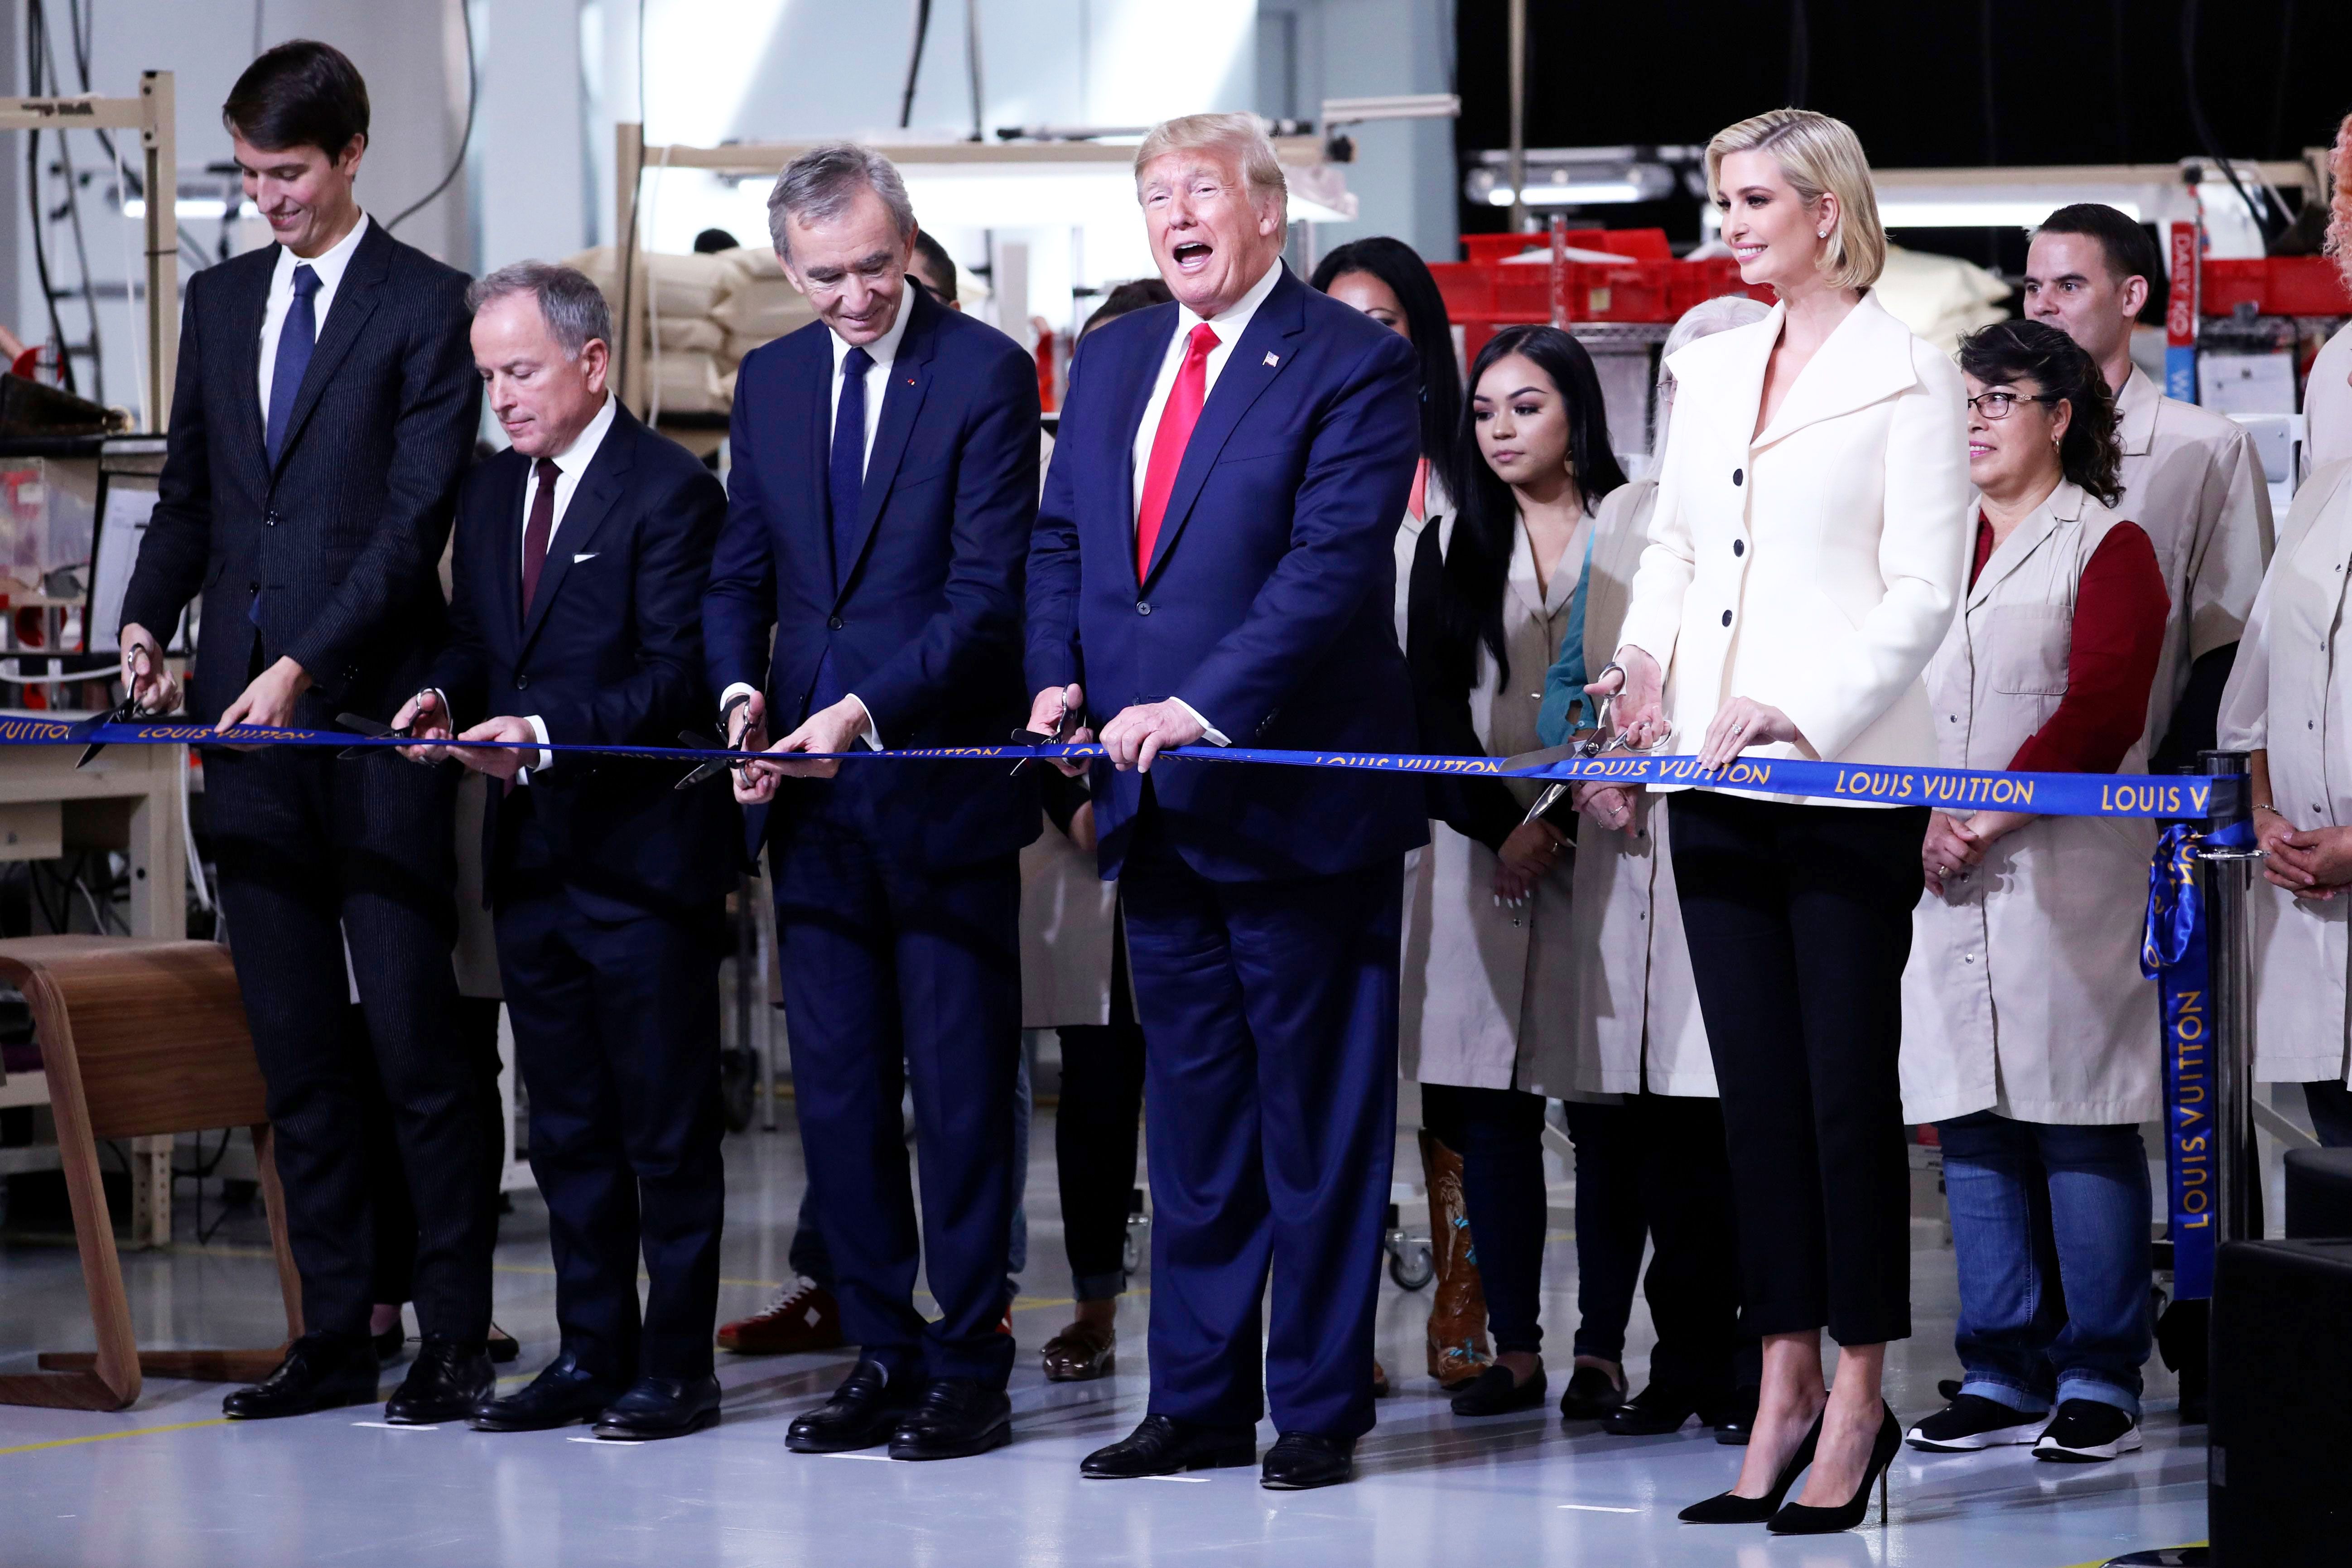 Trump's Louis Vuitton Ribbon-Cutting Ceremony Causes Hollywood